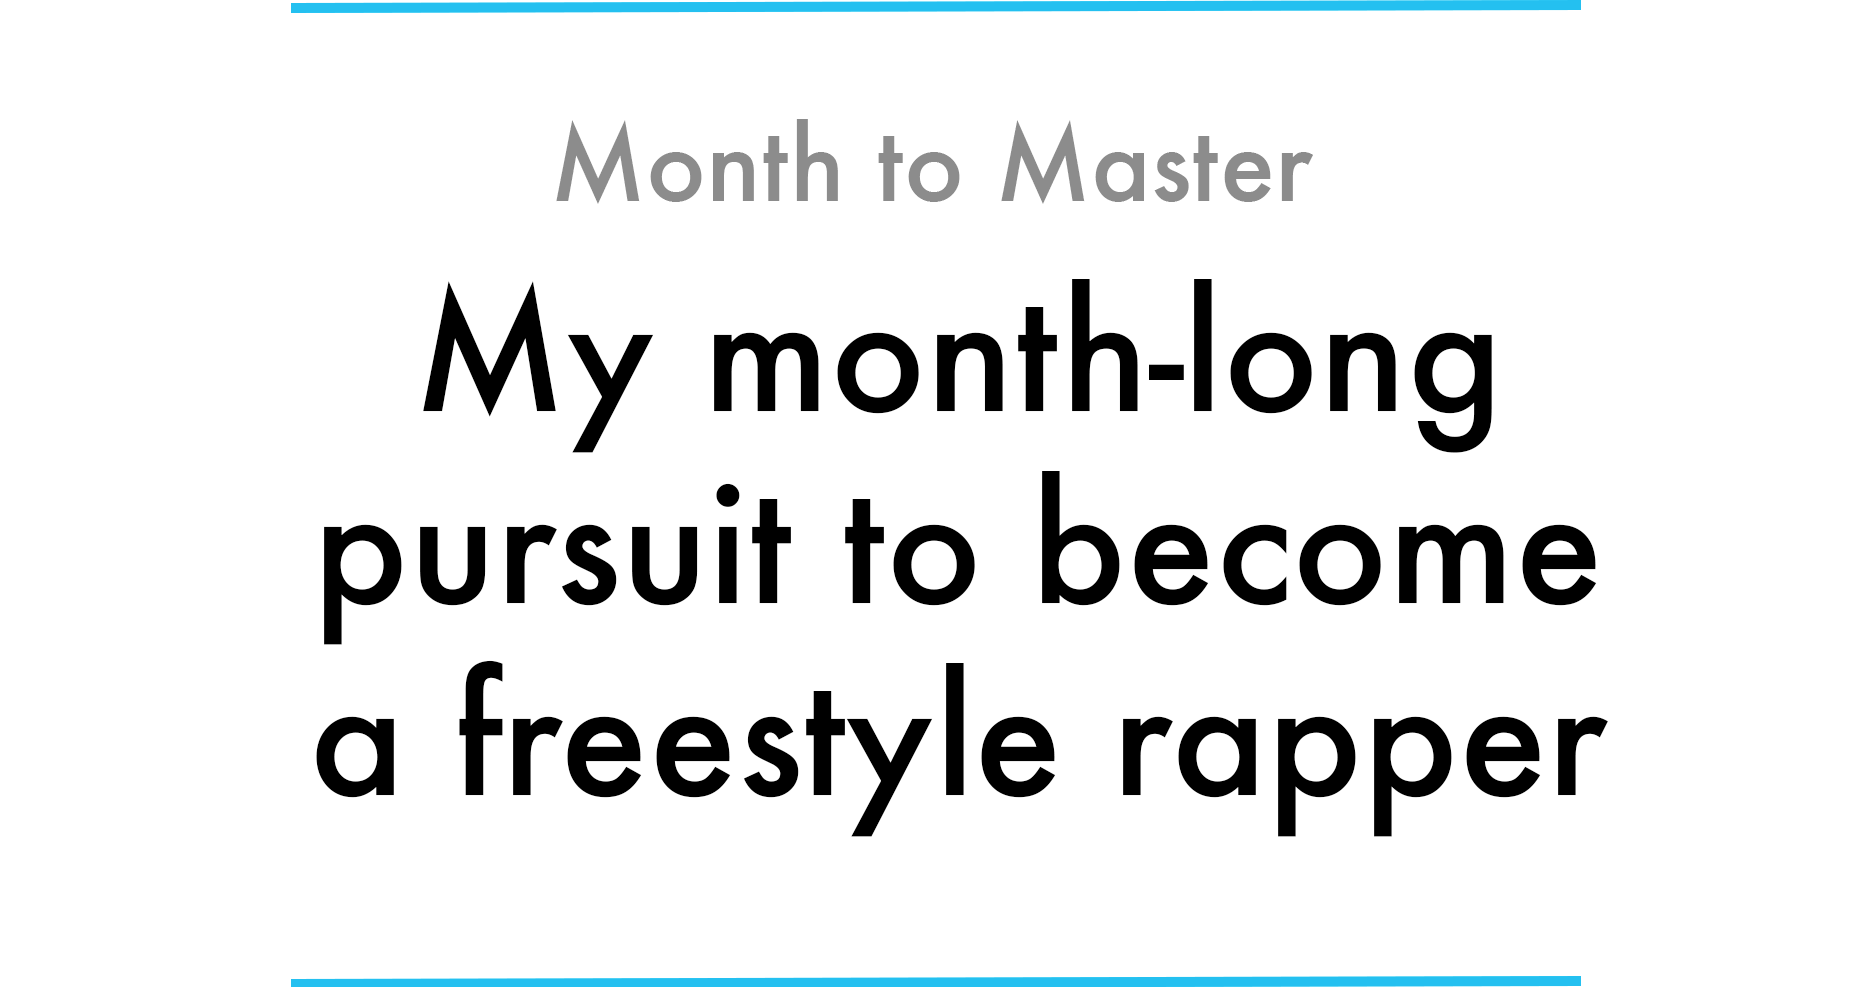 With Only 30 Days Of Practice Can I Continuou!   sly Freestyle Rap For - on september 1 2017 i asked myself the question with only one month of practice can i freestyle rap continuously for three minutes